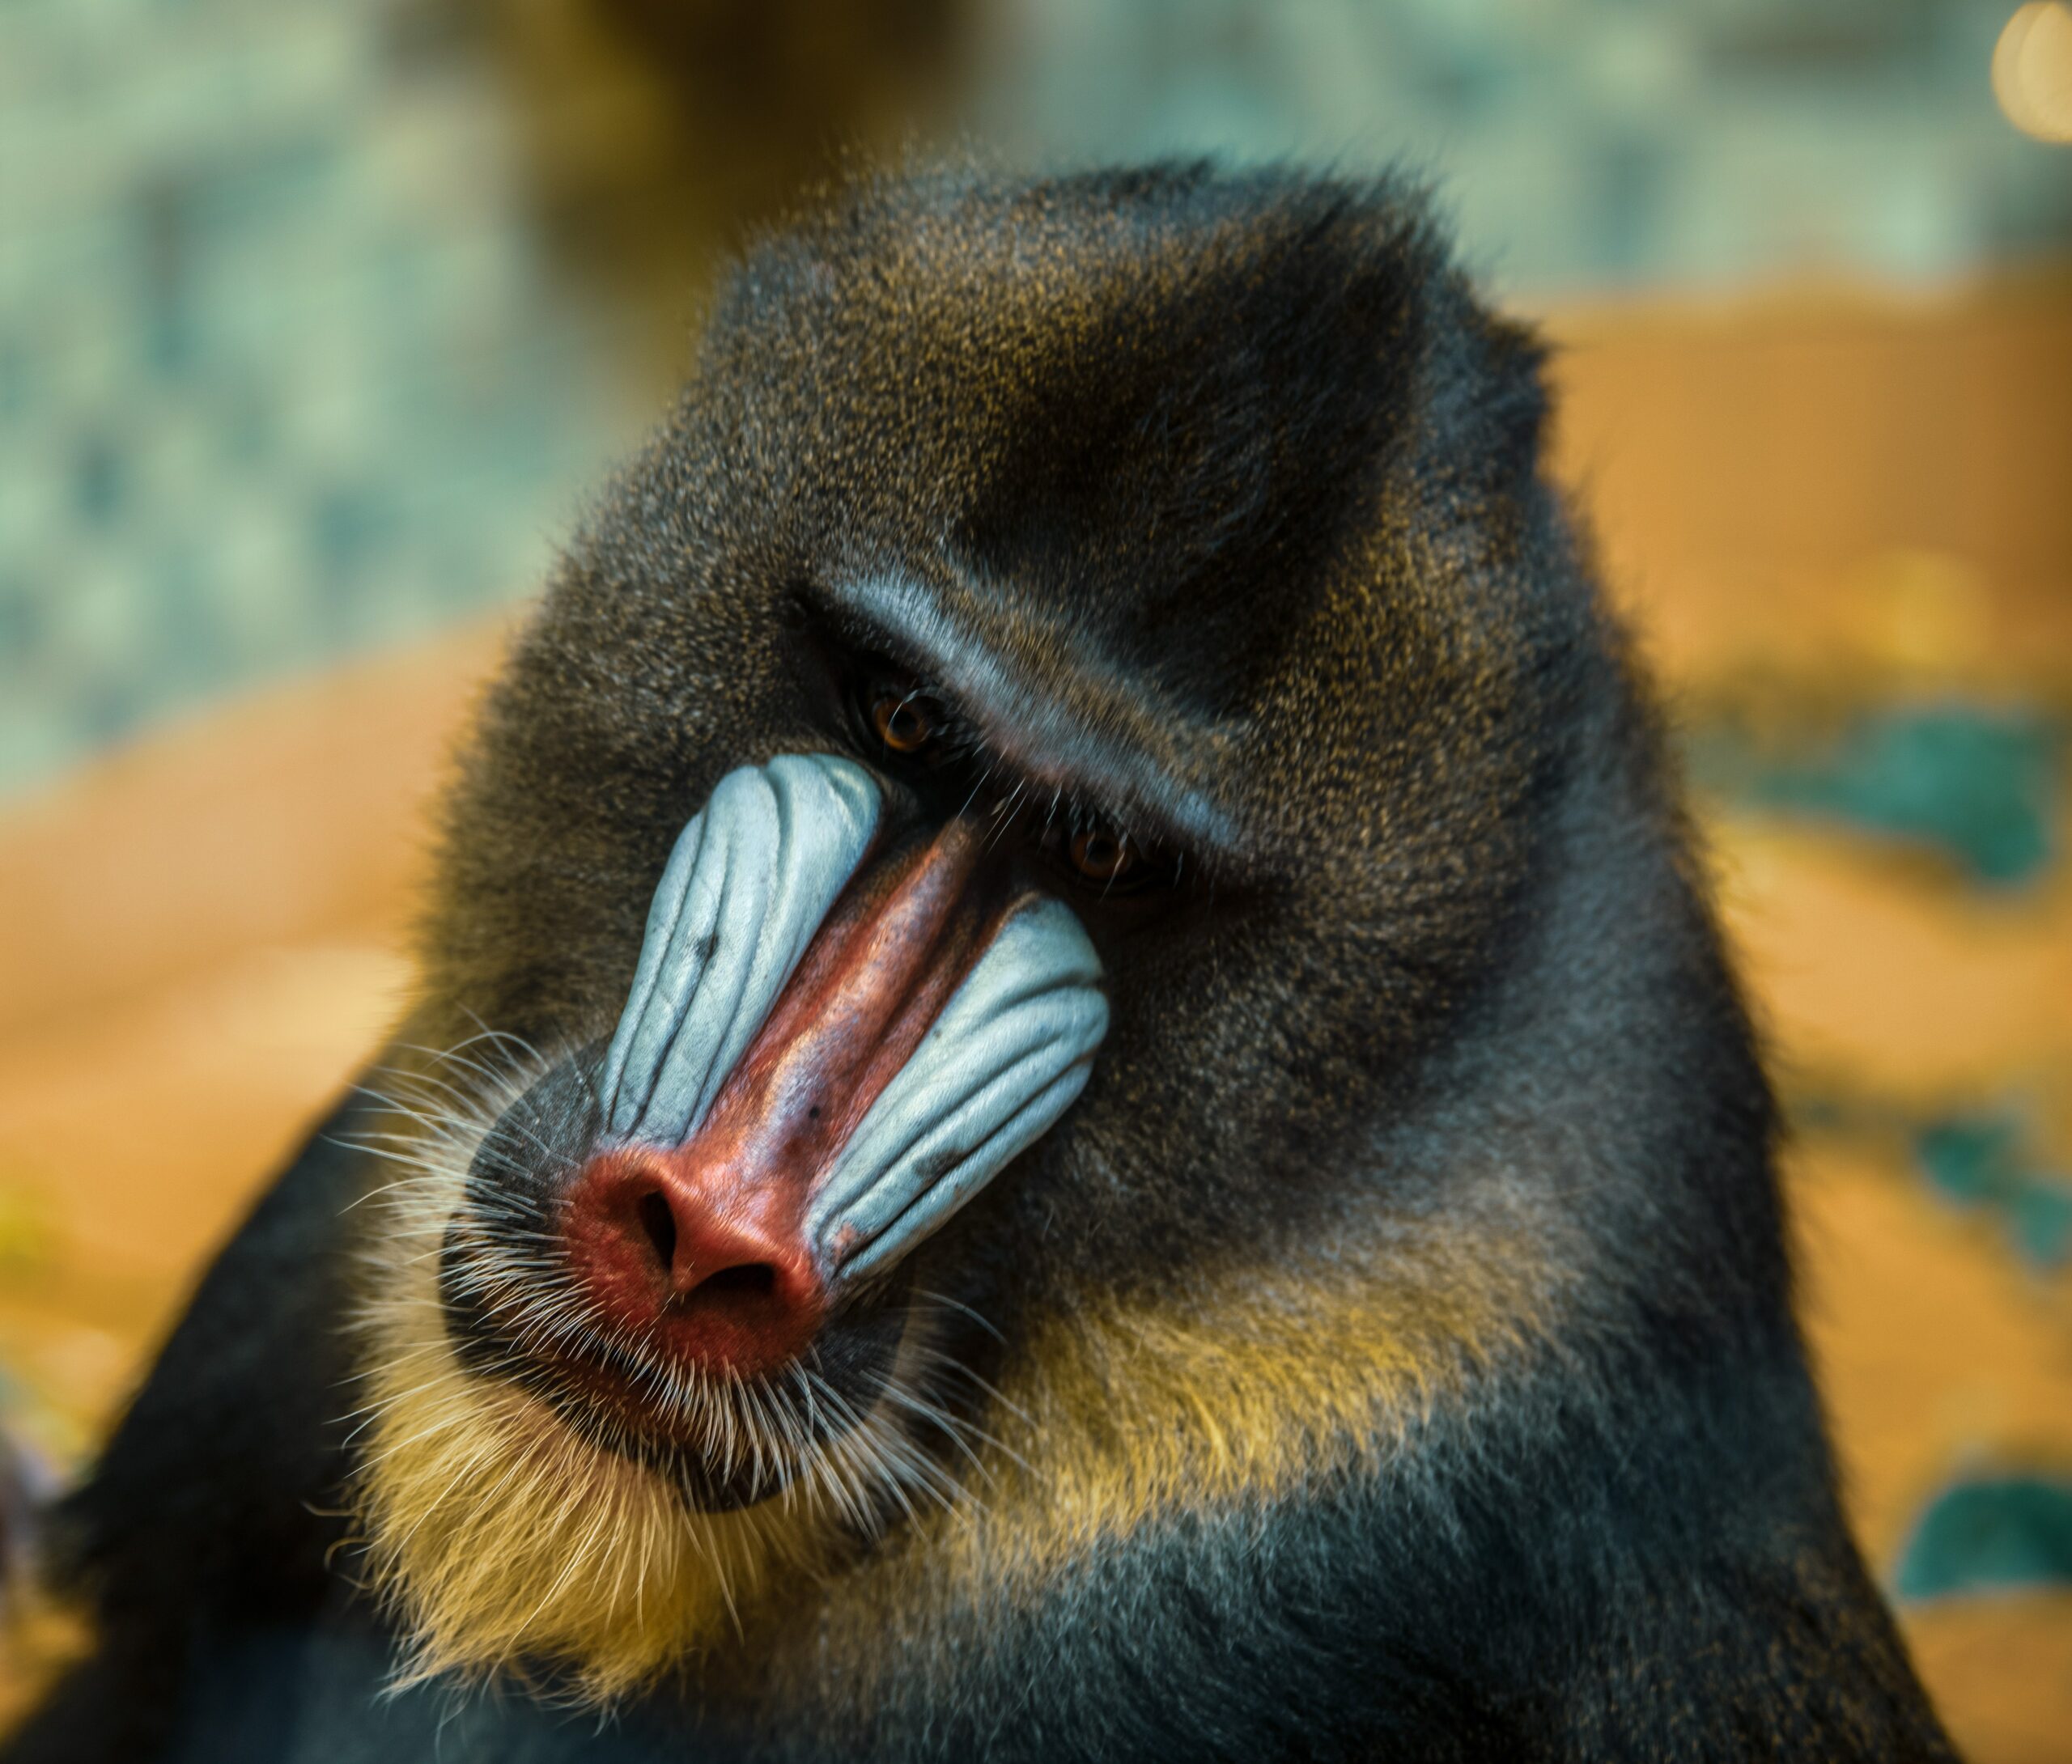 A mandrill baboon in a zoo